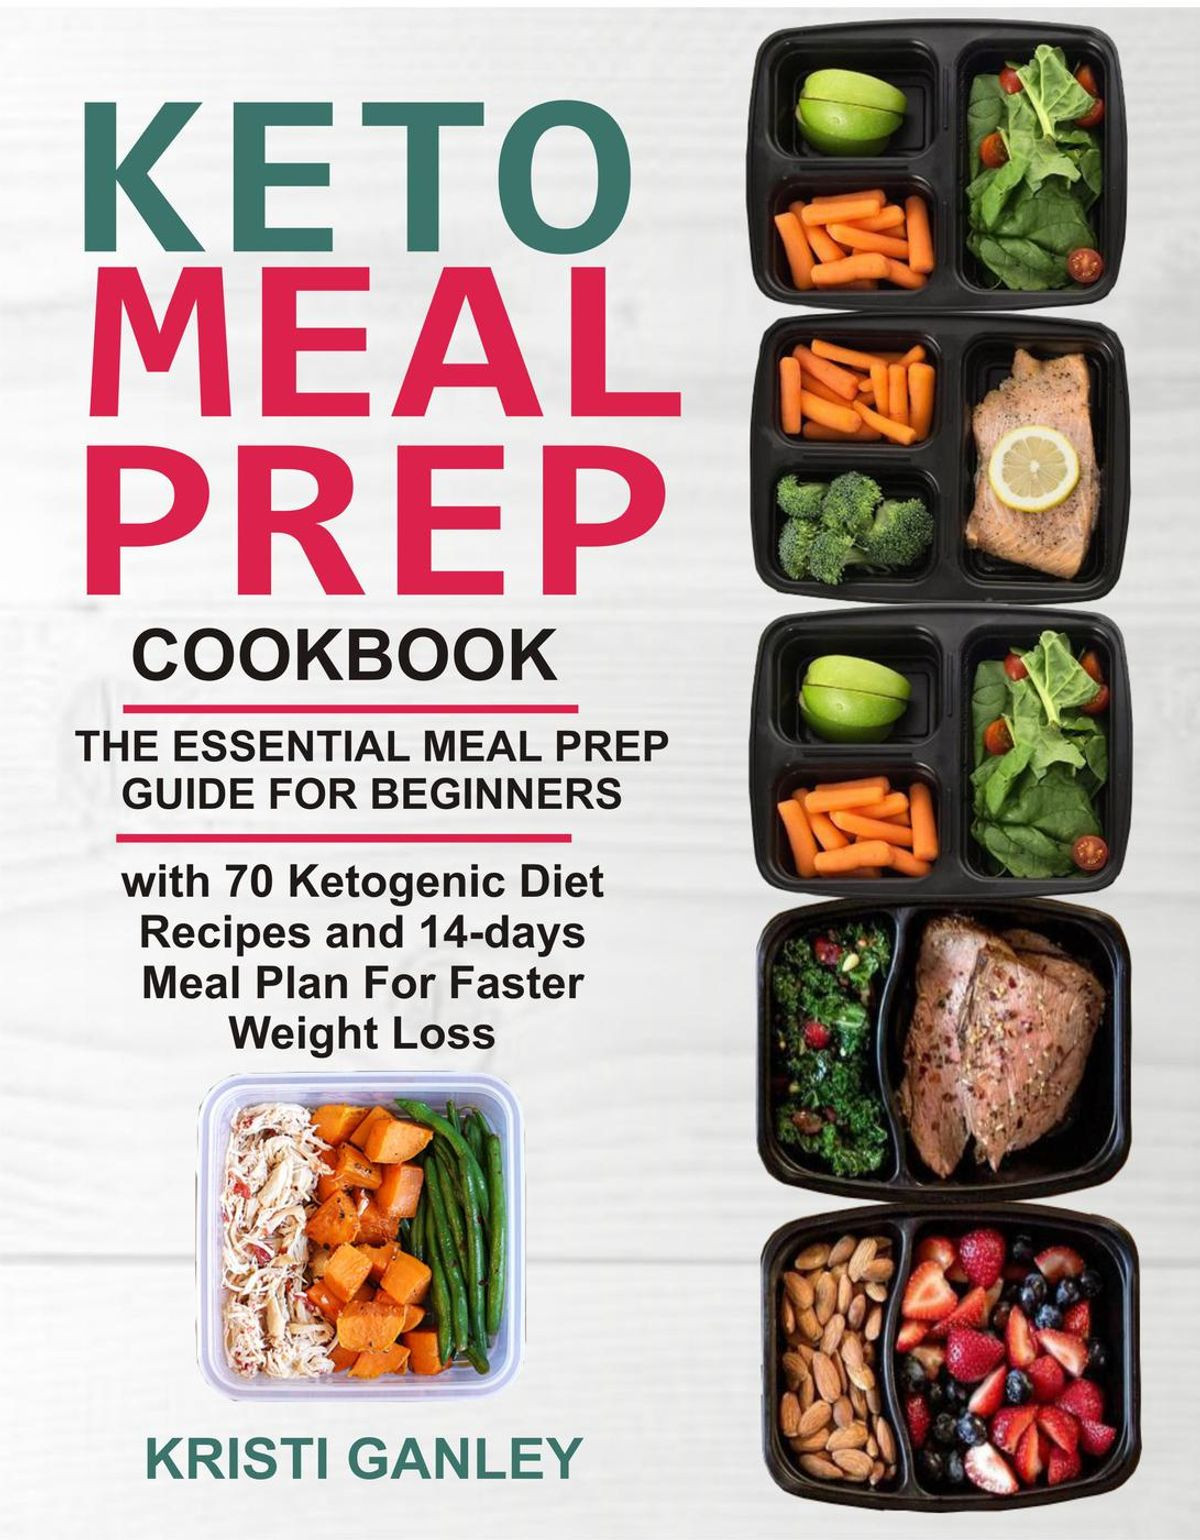 Keto Diet Meal Prep For Beginners
 Keto Meal Prep Cookbook The Essential Meal Prep Guide for